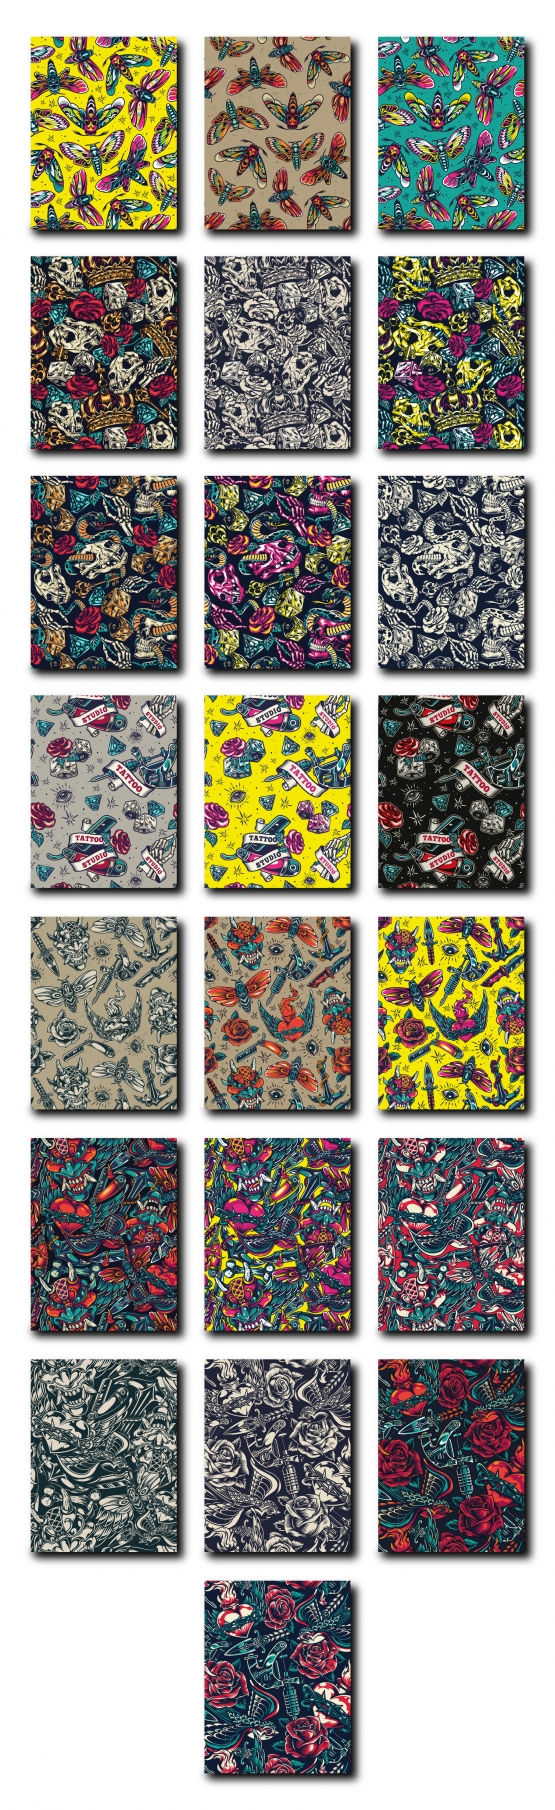 Retro tattoo seamless patterns collection with various elements in different color palettes